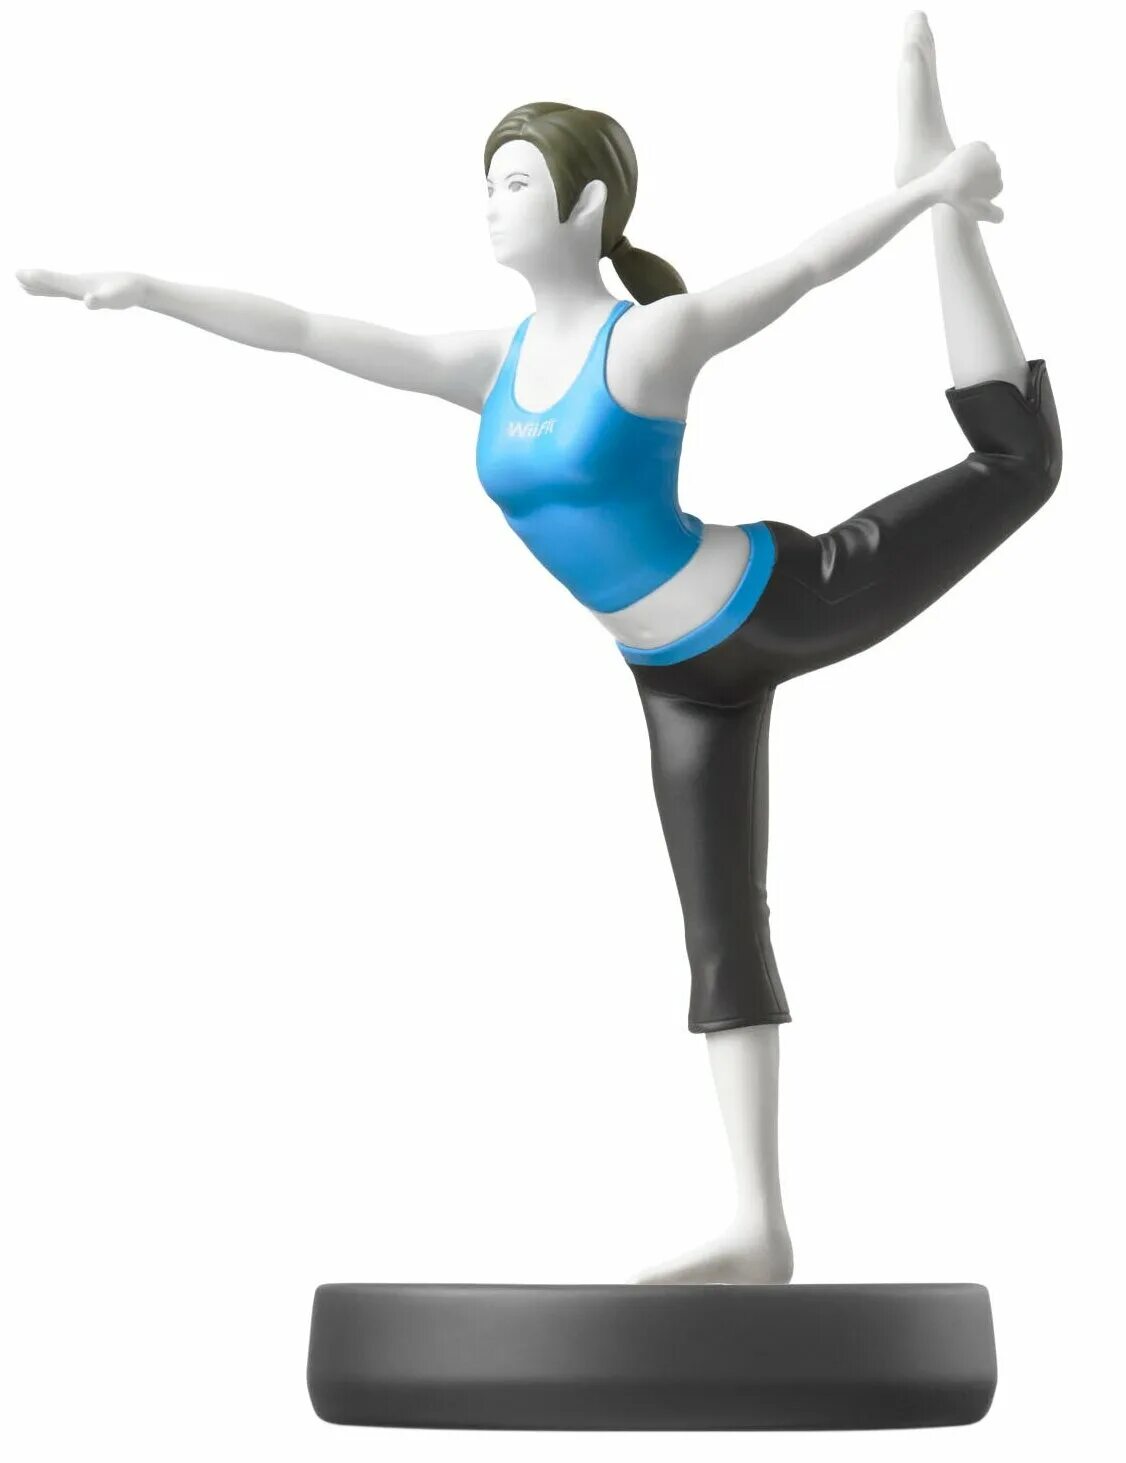 Wii fit. Нинтендо тренер Wii. Wii Fit Trainer. Nintendo тренер Wii Fit.